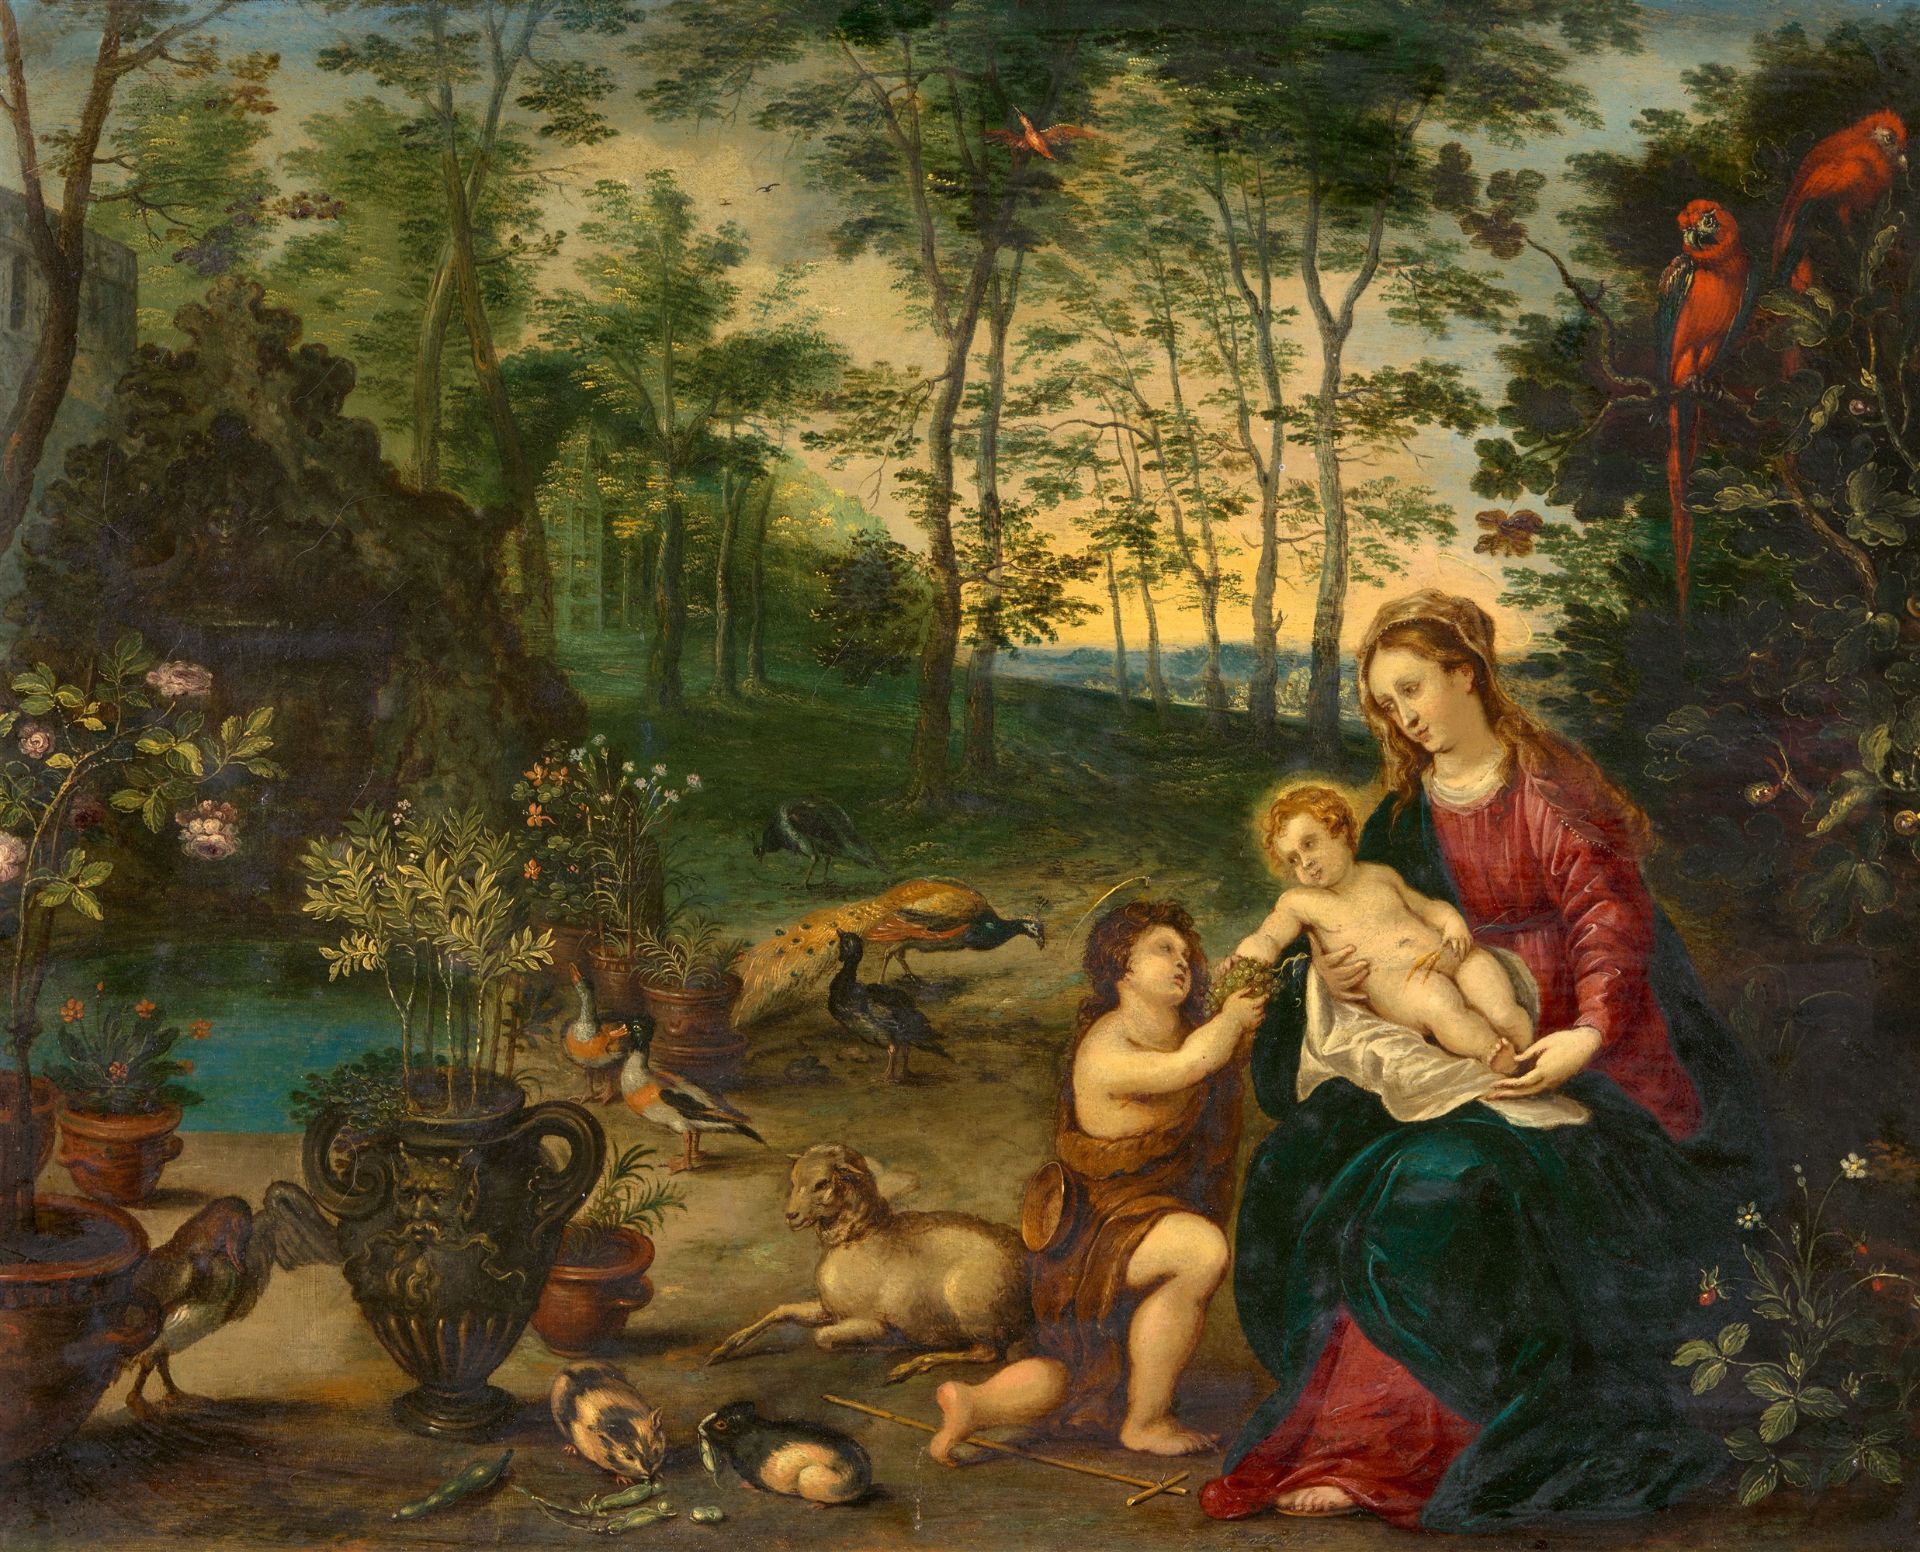 Jan Brueghel the Younger, attributed to, Pieter van Avont, attributed to, The Virgin and Child with 